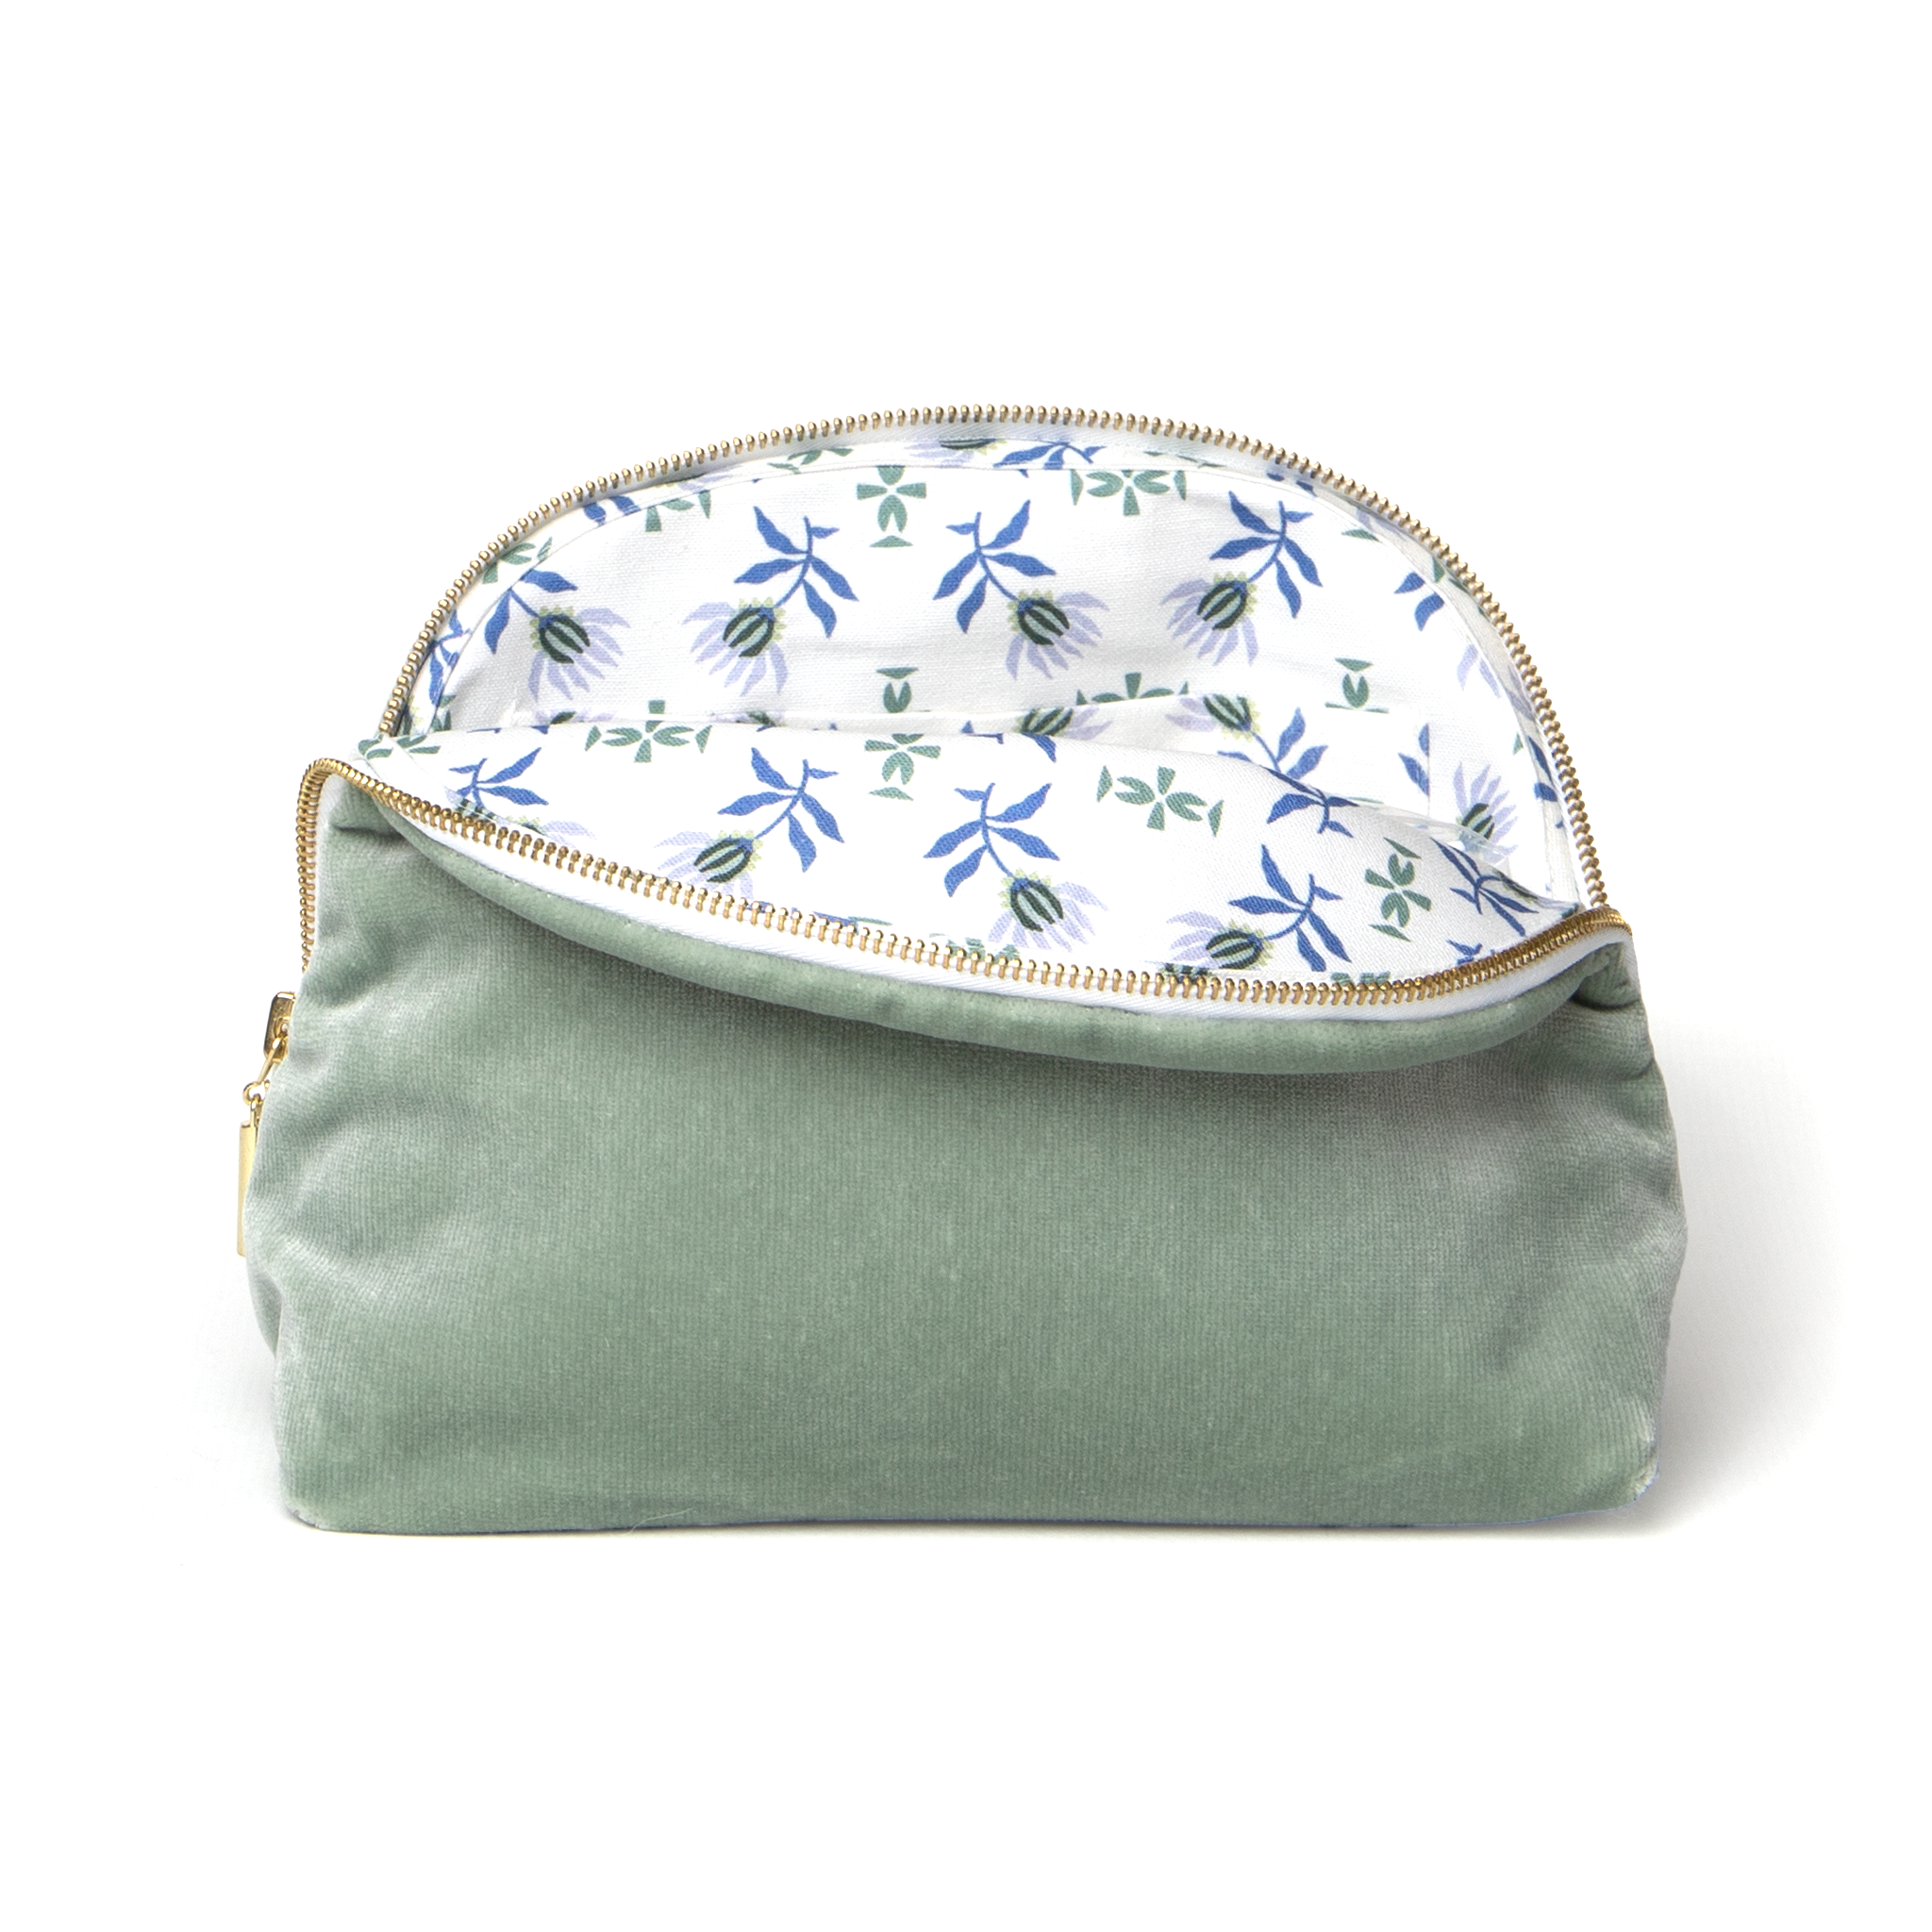 Blue Green Velvet Monogrammed Pouch with a Blue & Green Floral Print inside and gold zipper